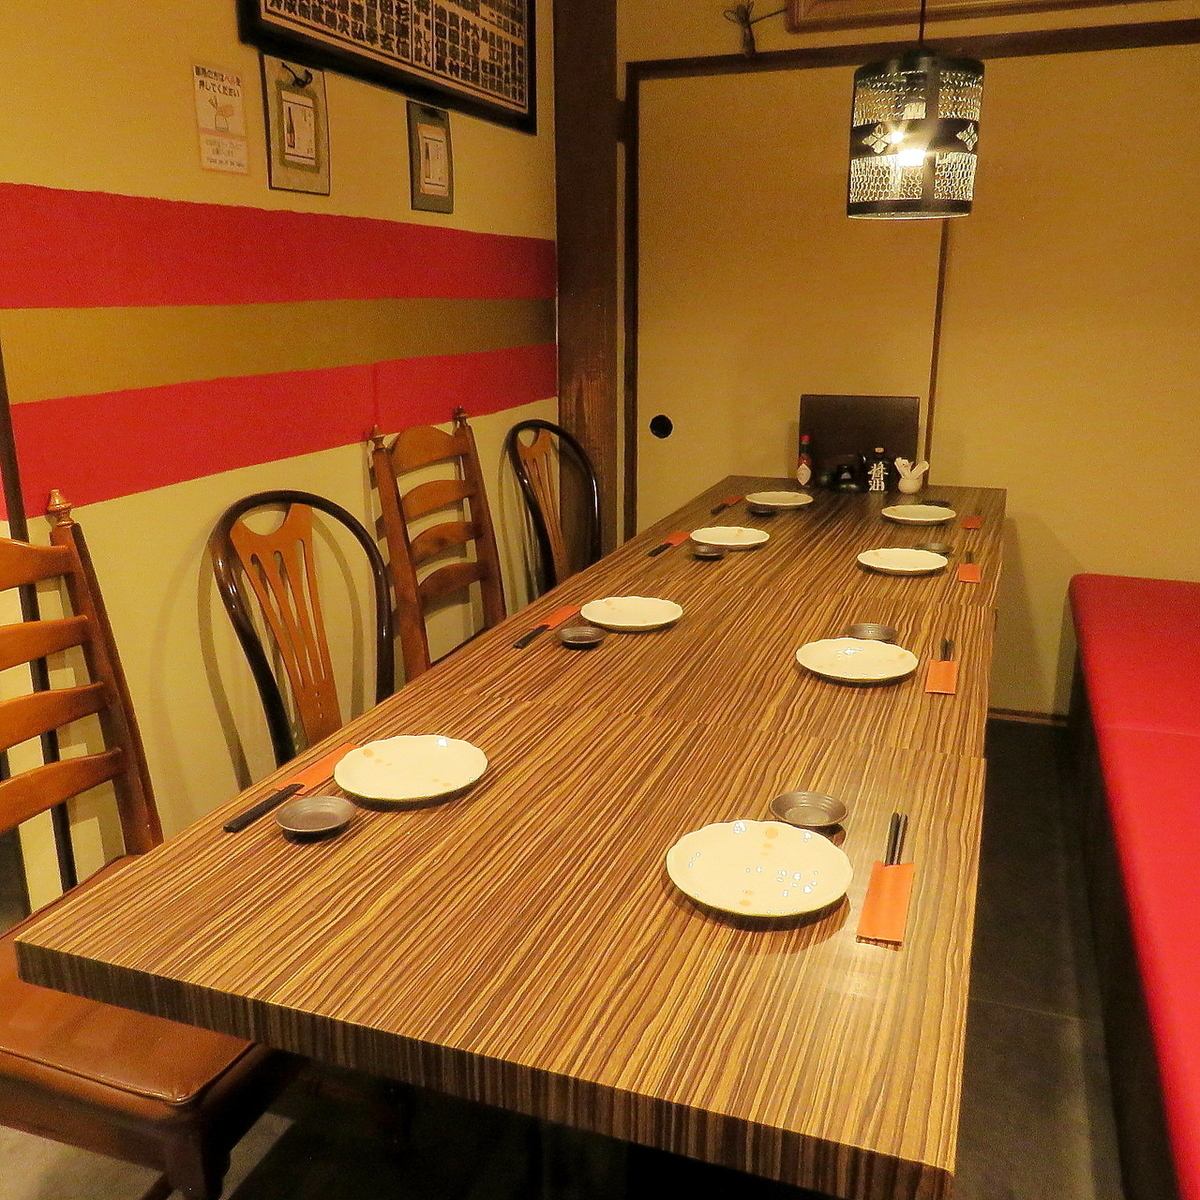 There is also a semi-private room seat that is recommended for 6 to 8 people ♪